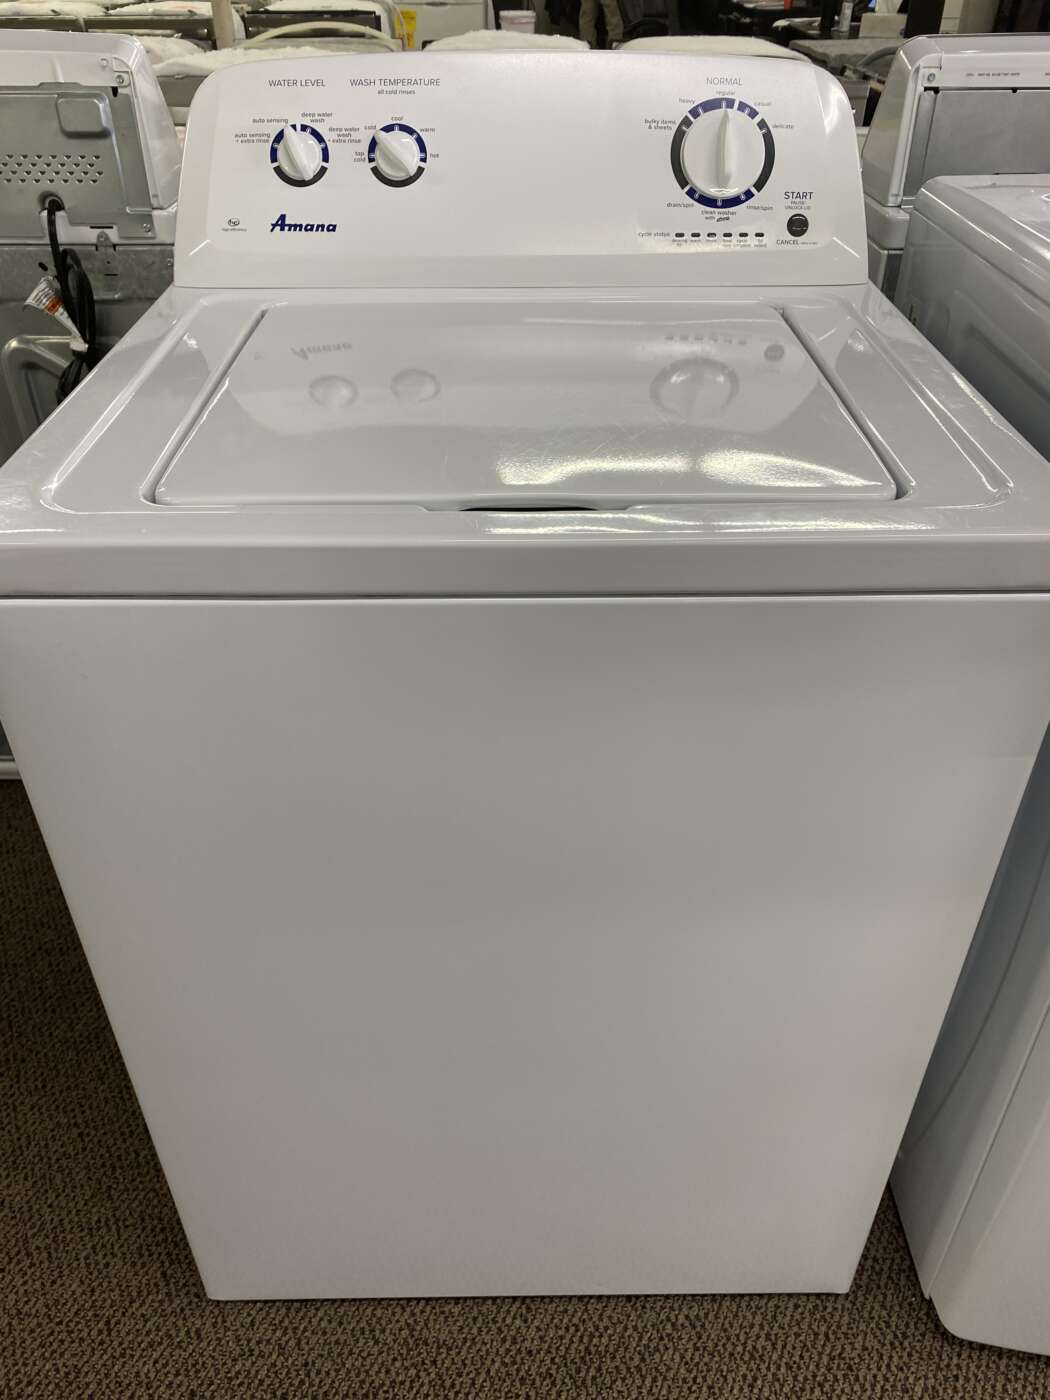 Reconditioned AMANA 3.5 Cu. Ft. Top-Load Washer – White